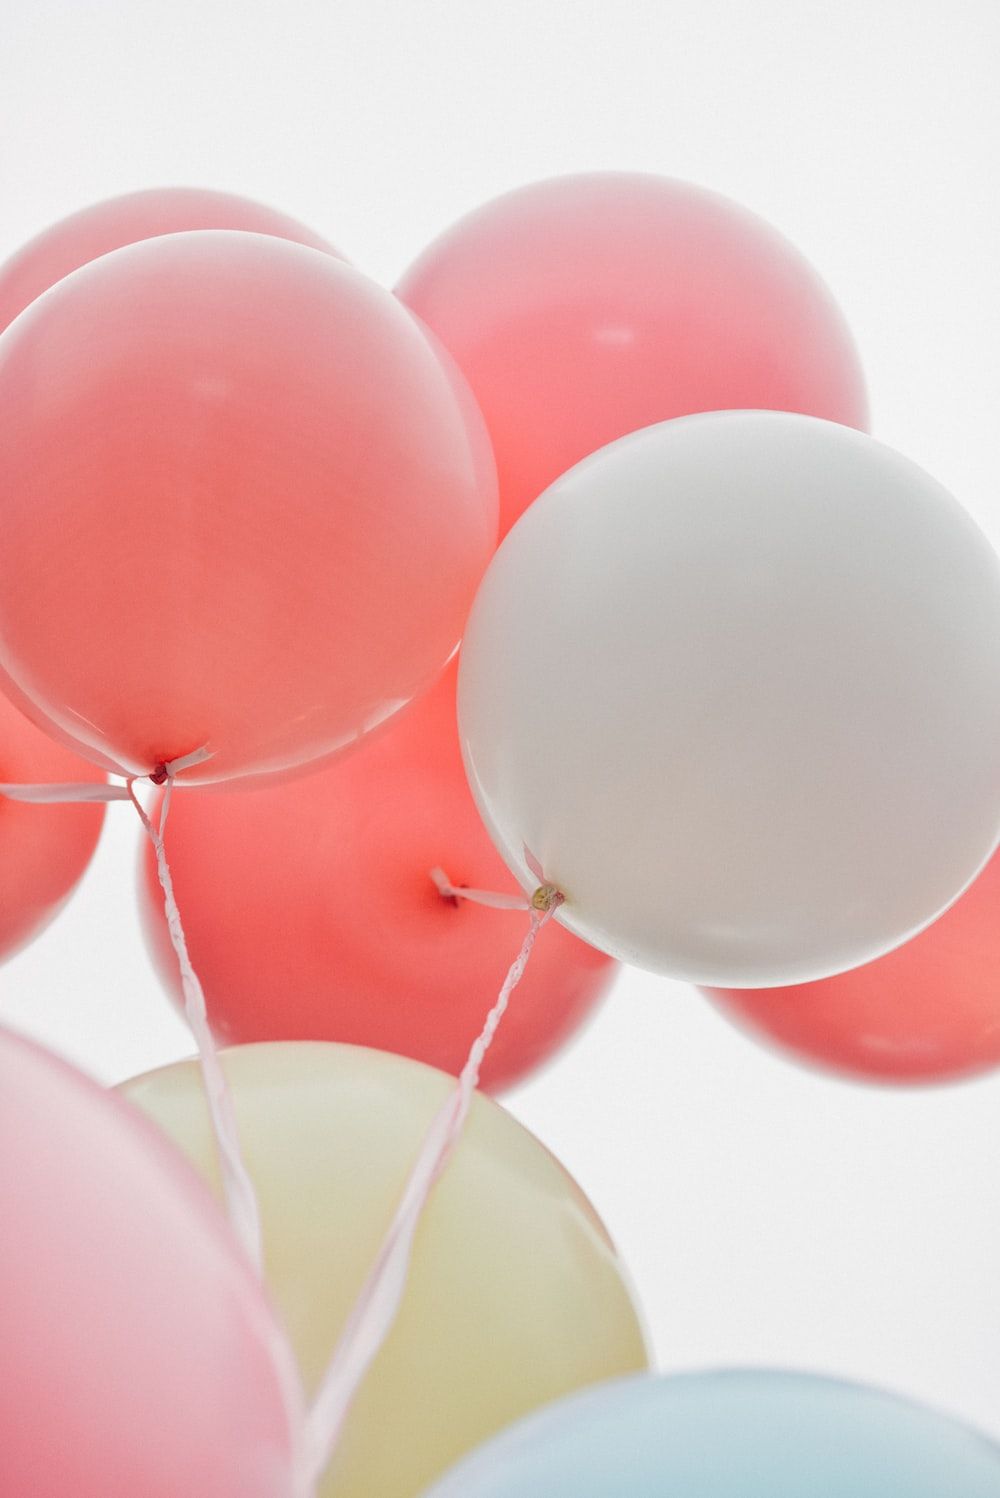 Pink Balloons Picture. Download Free Image